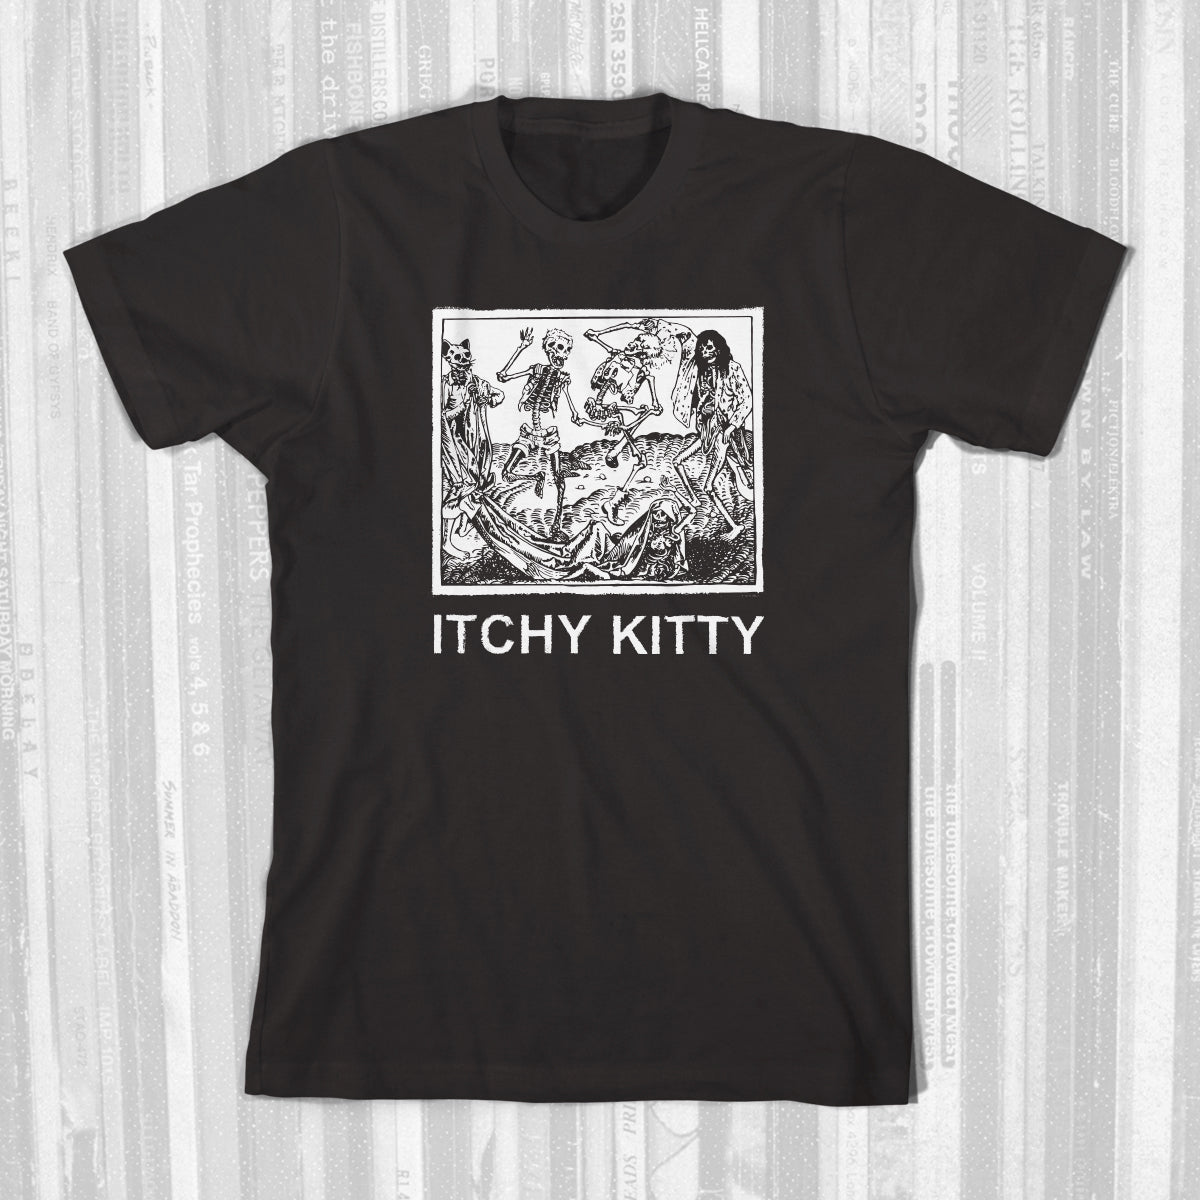 Itchy Kitty: Buckles tee